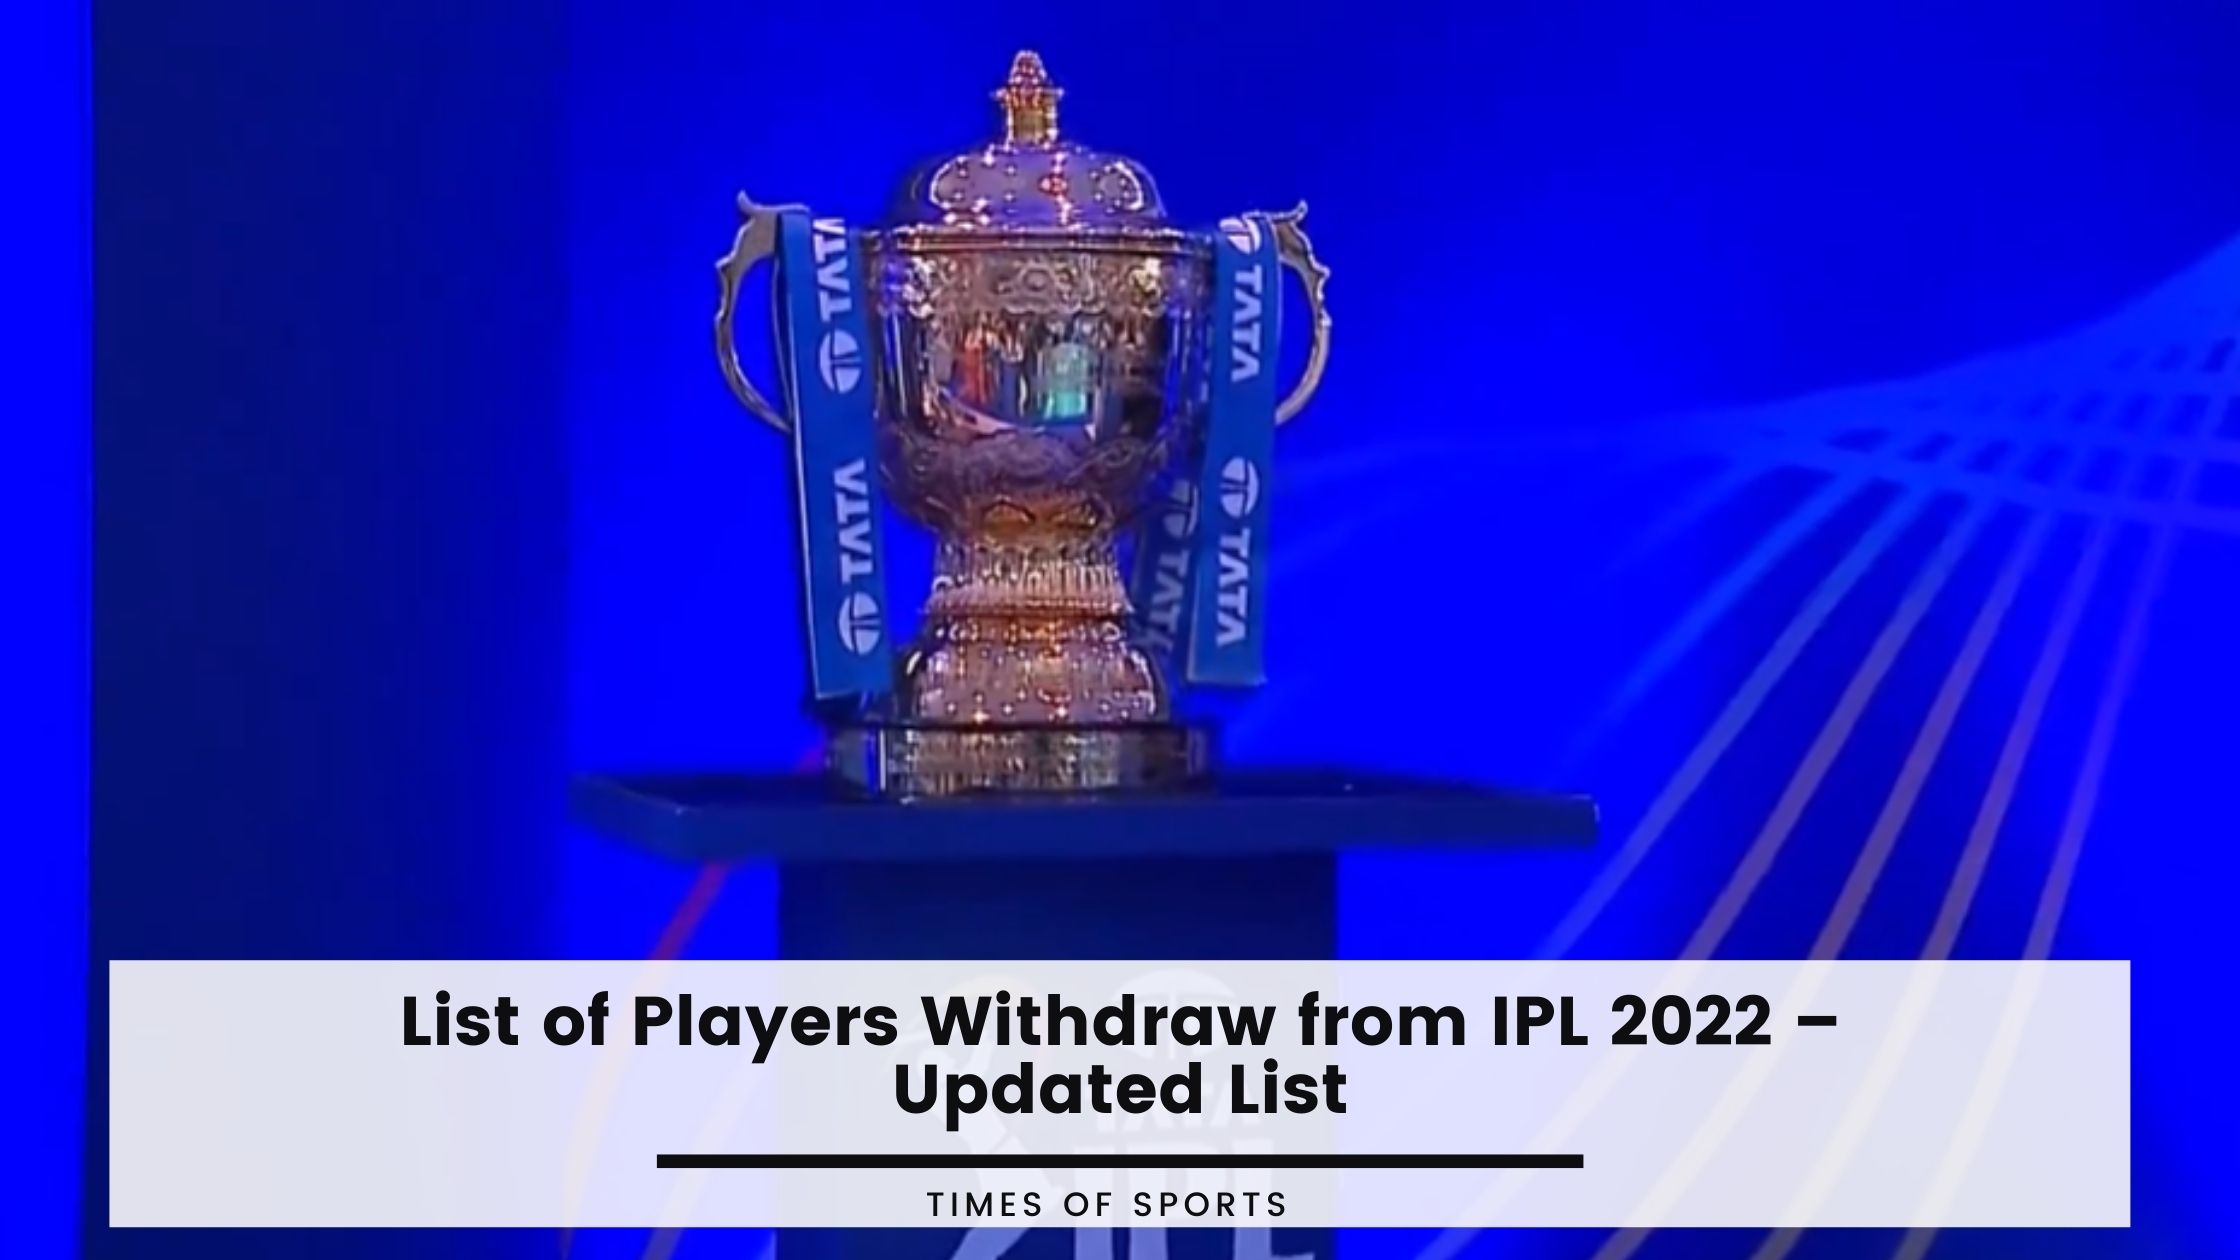 List of Players Withdraw from IPL 2022 - Updated List